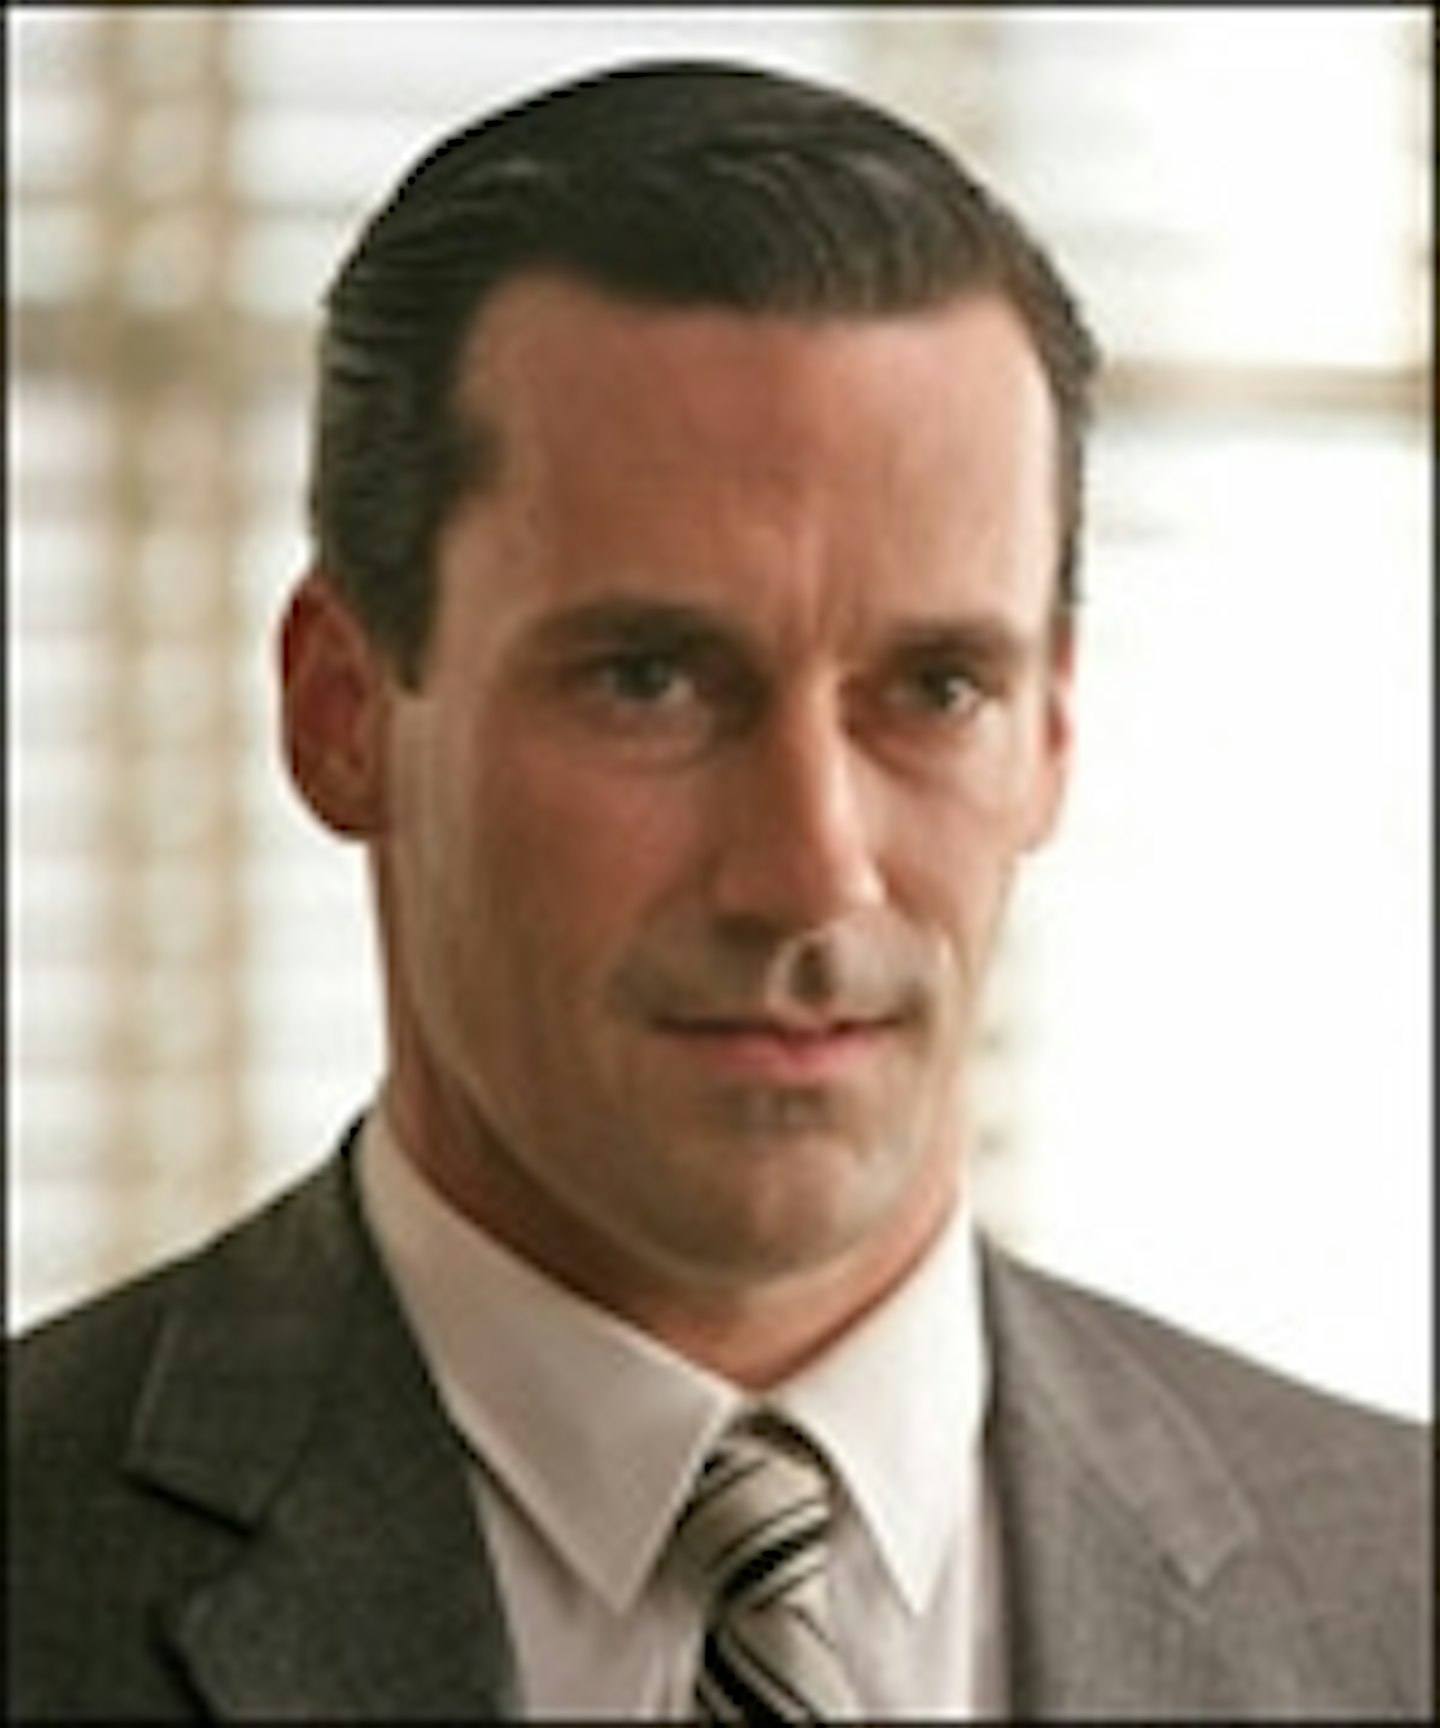 Does Jon Hamm Have Friends With Kids?